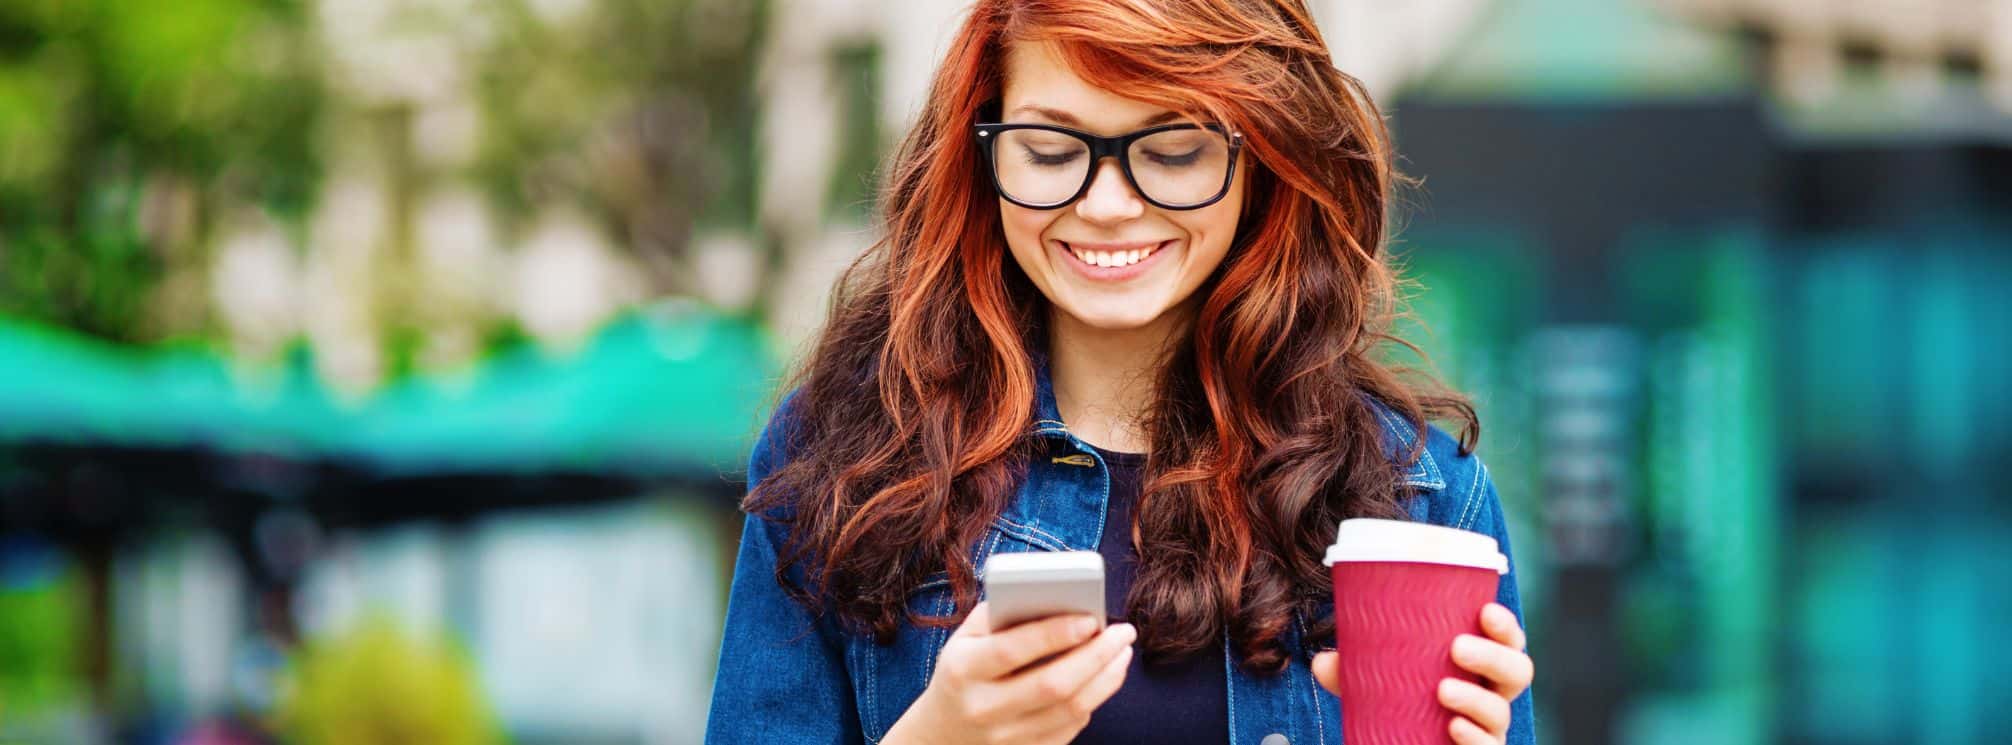 Red haired woman drinking a coffee and checking her phone on the way to work